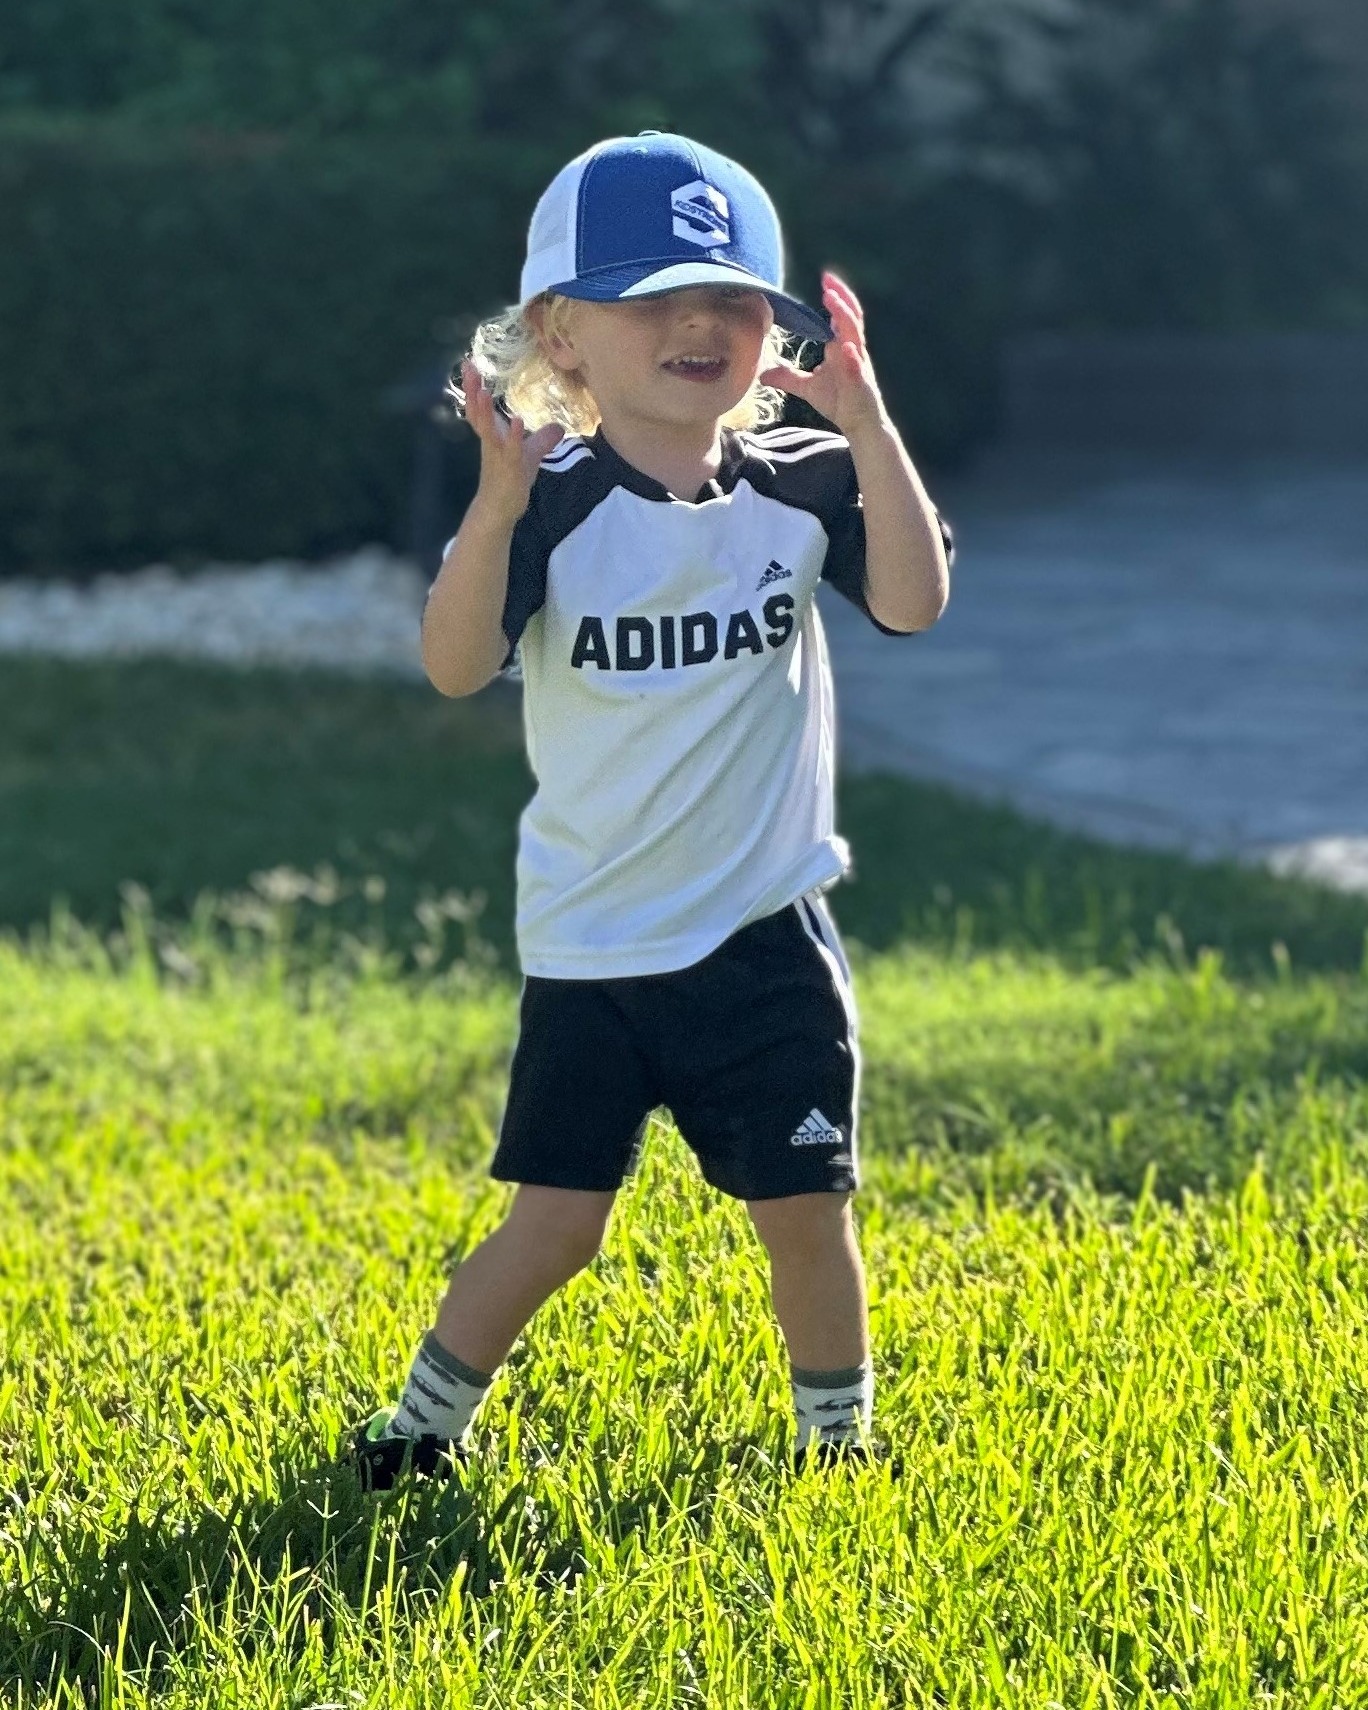 toddler wearing a blue baseball cap and summer clothes while standing outside in the grass on a sunny day